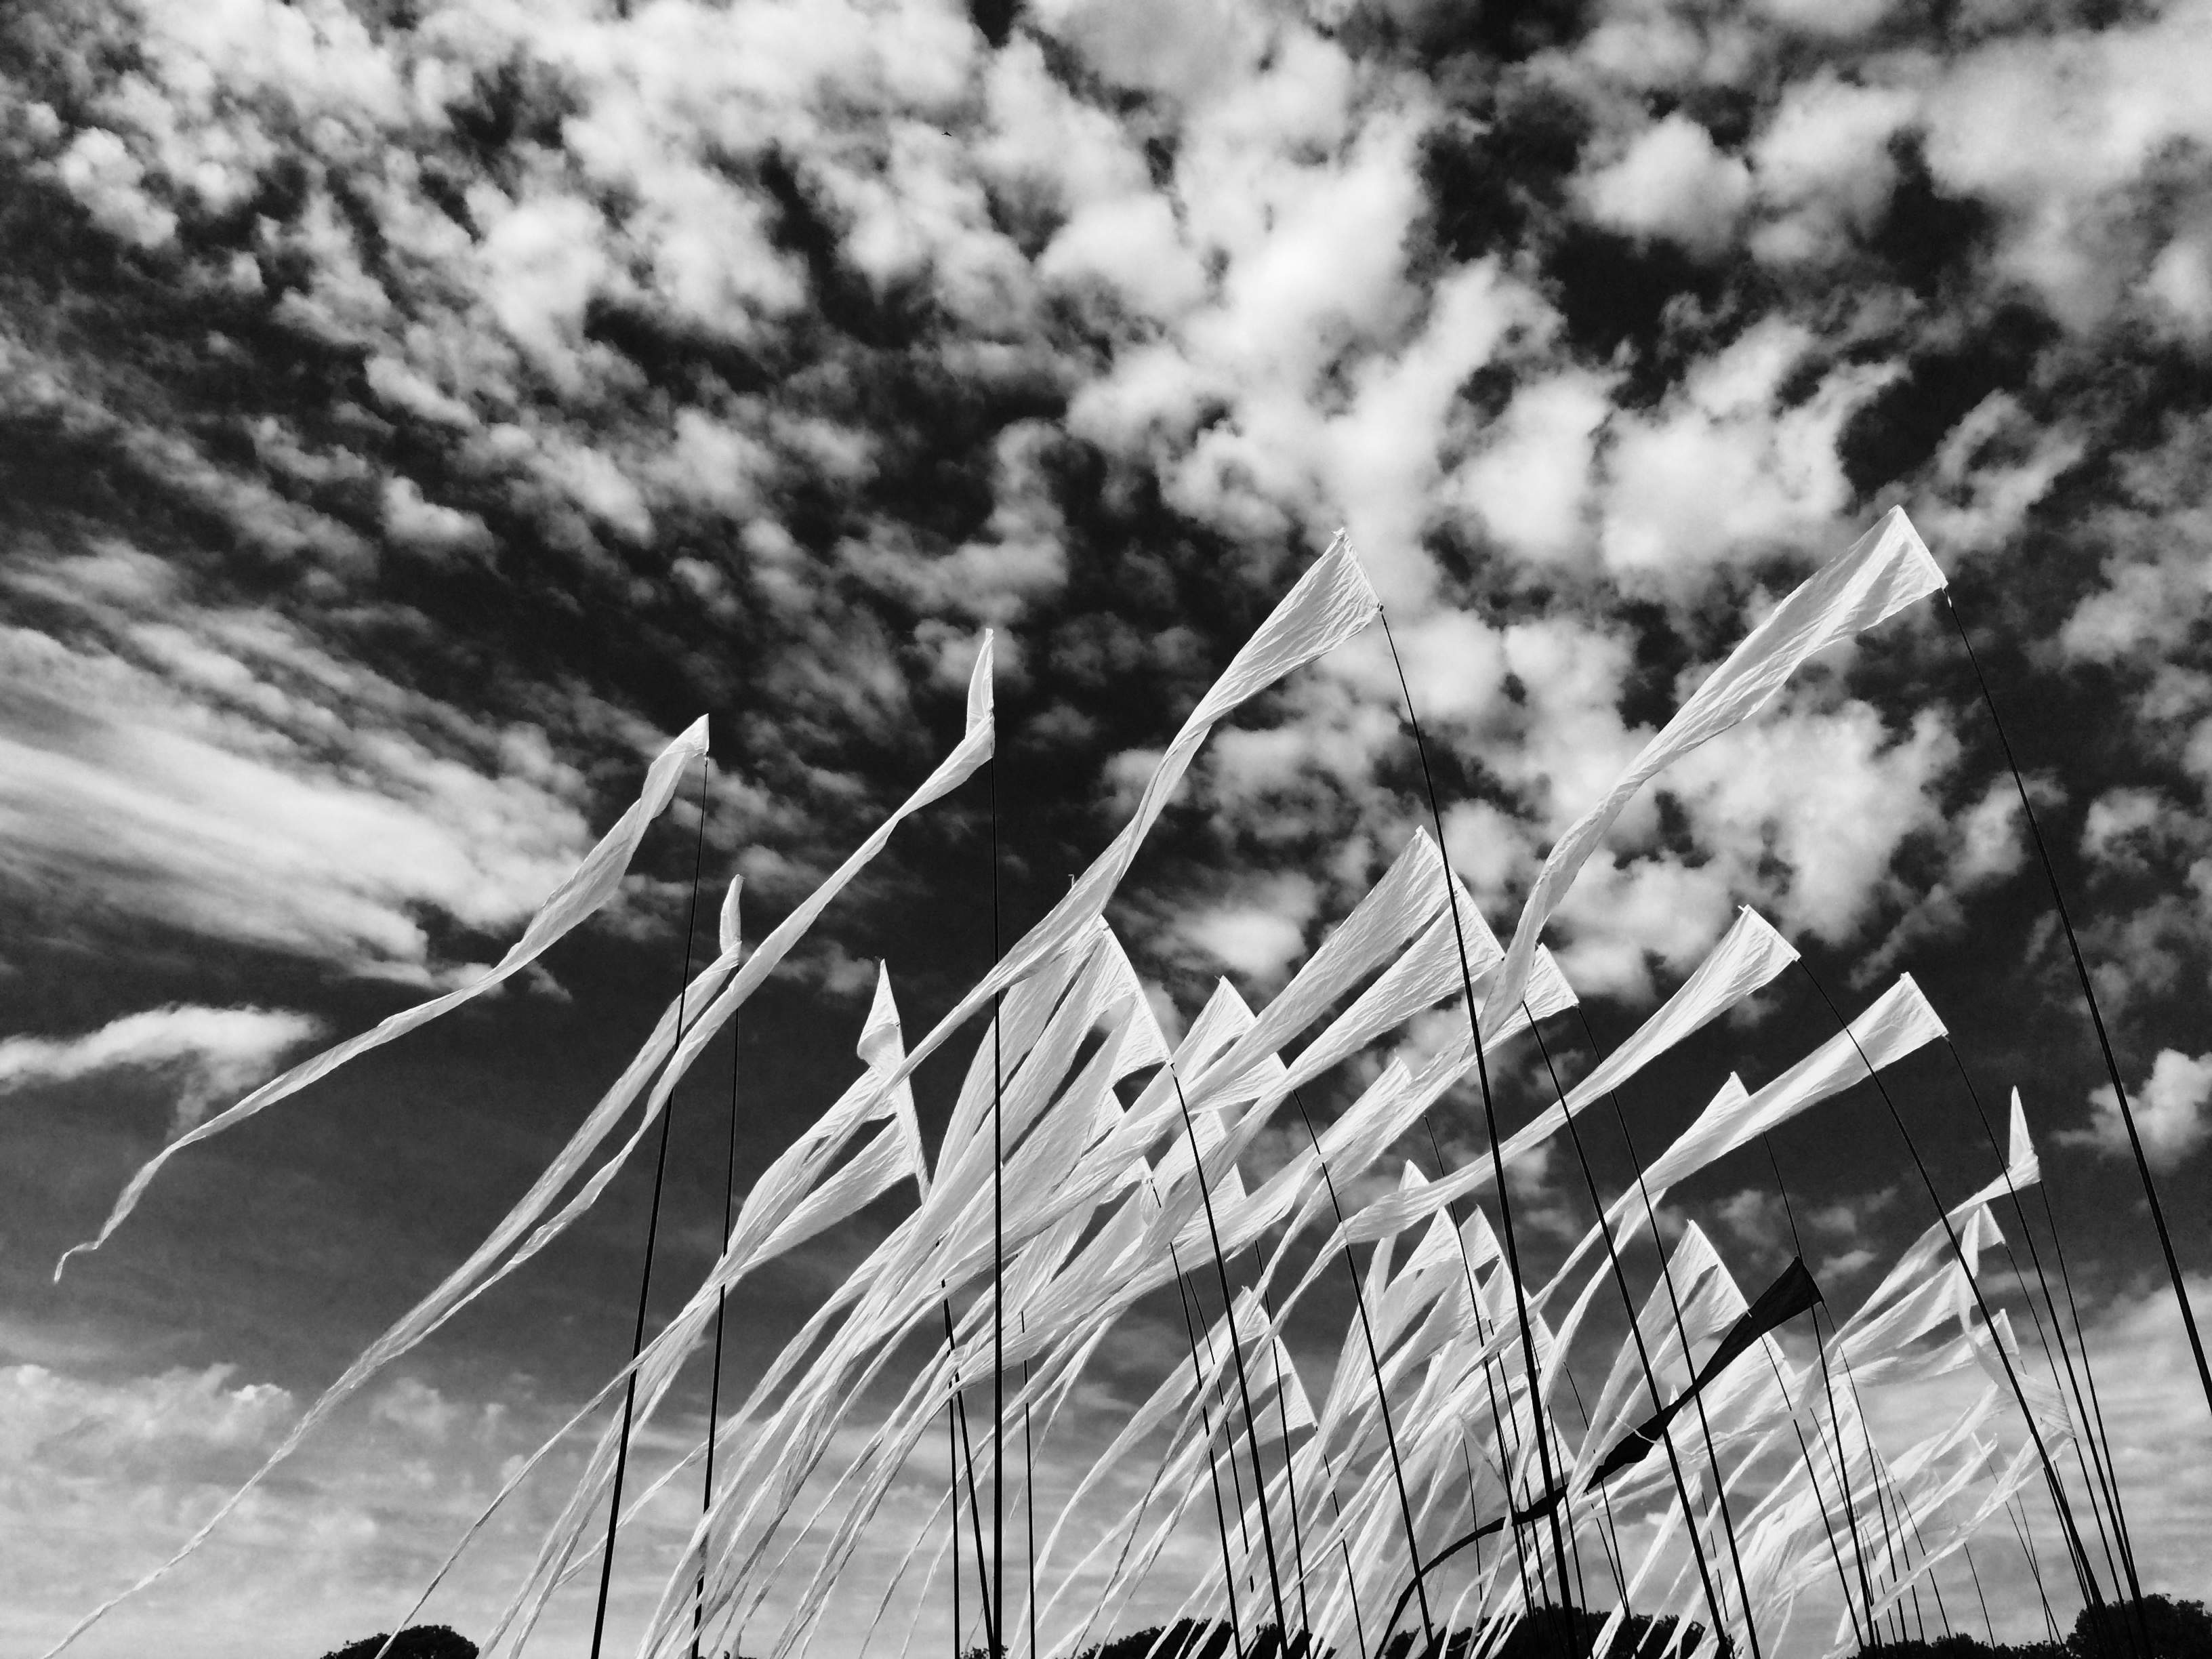 The flags were captivating in the light winds passing across The Downs, Bristol